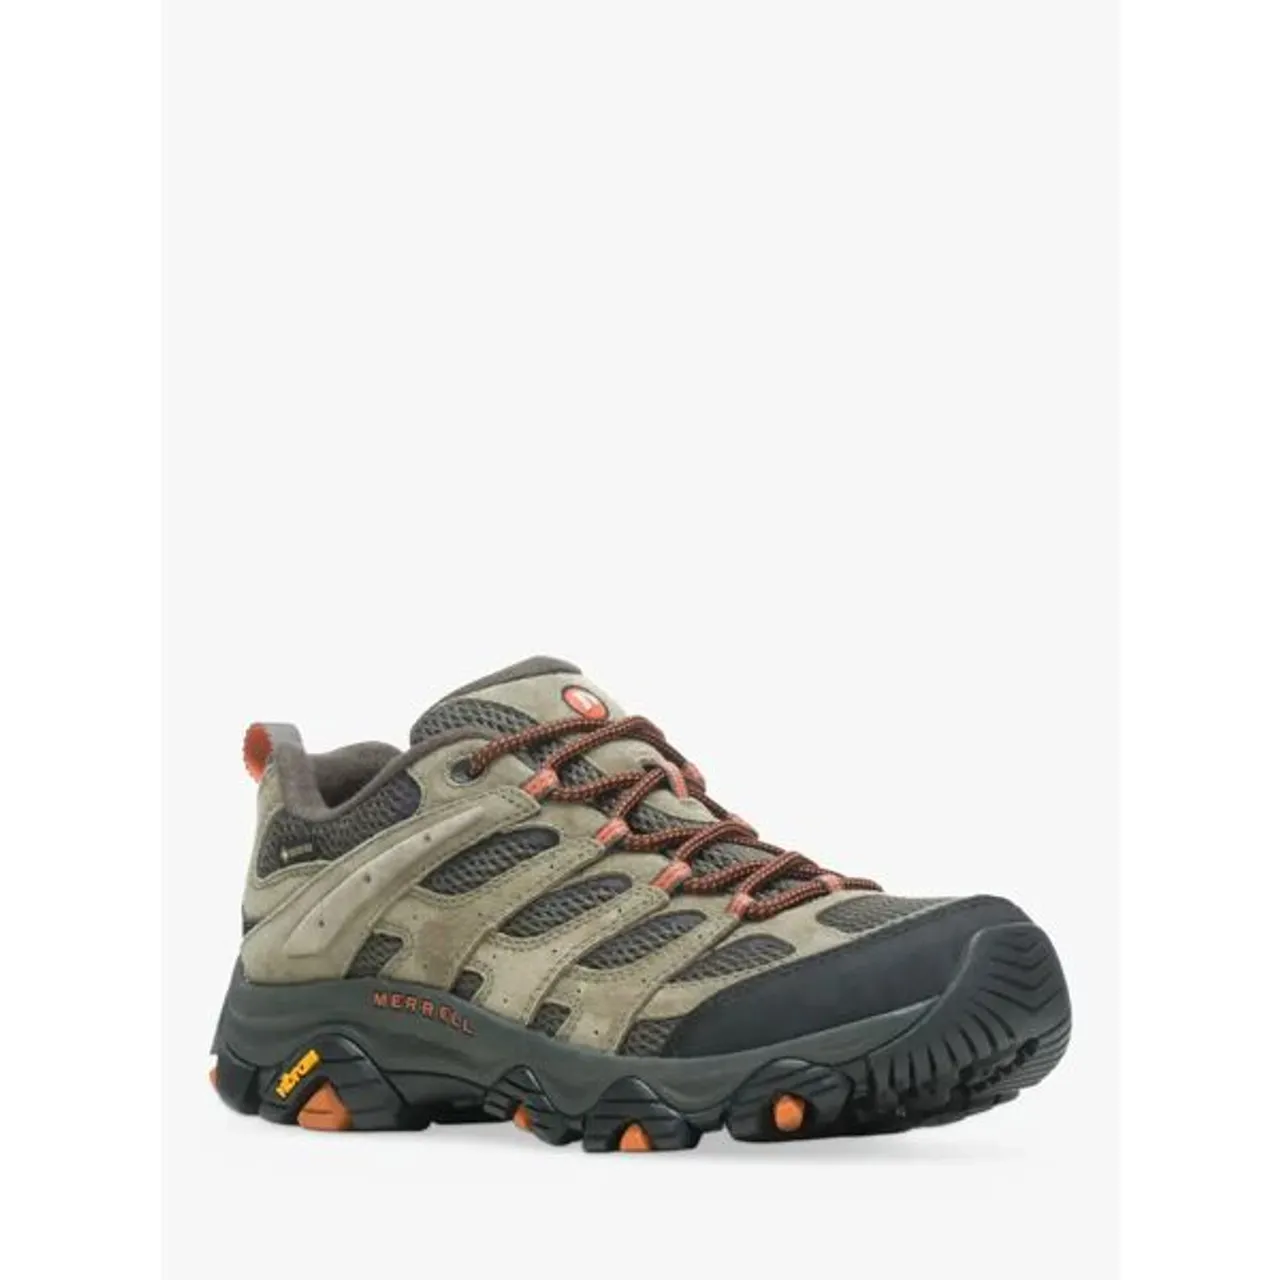 Merrell Moab 3 Men's Gore-Tex Waterproof Hiking Shoes - Olive - Male